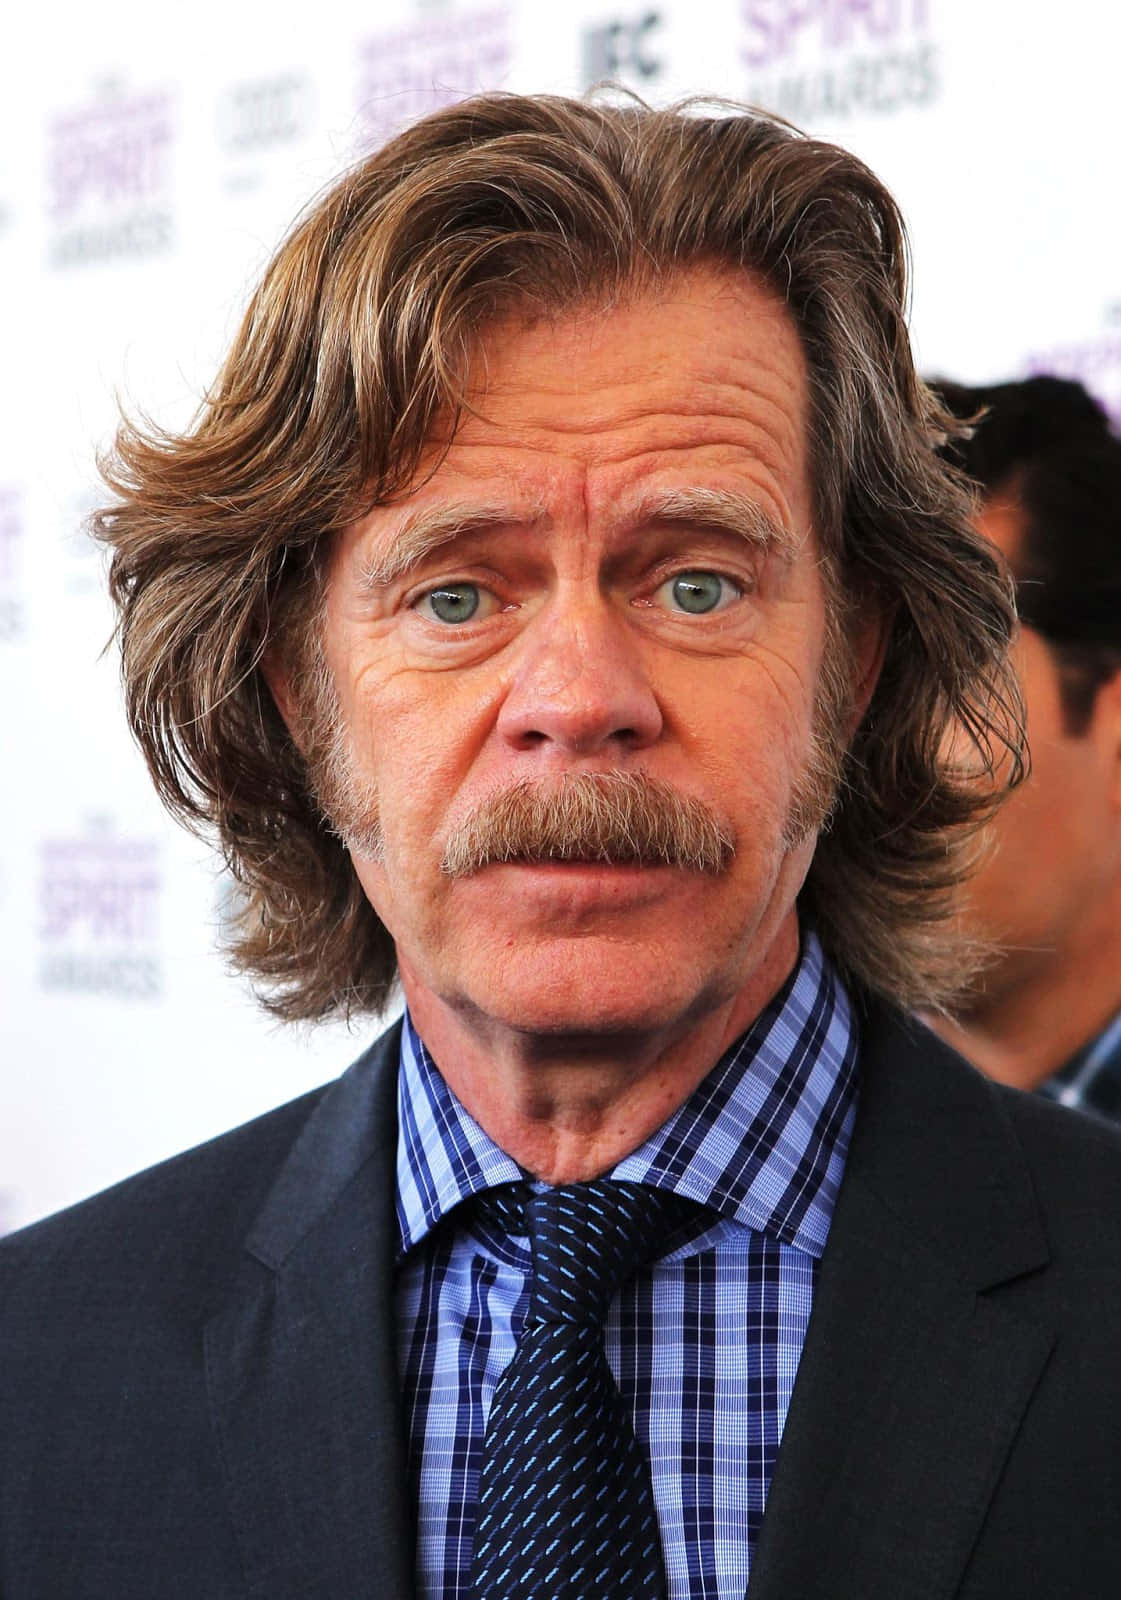 Award-winning Actor William H. Macy Posing For A Portrait